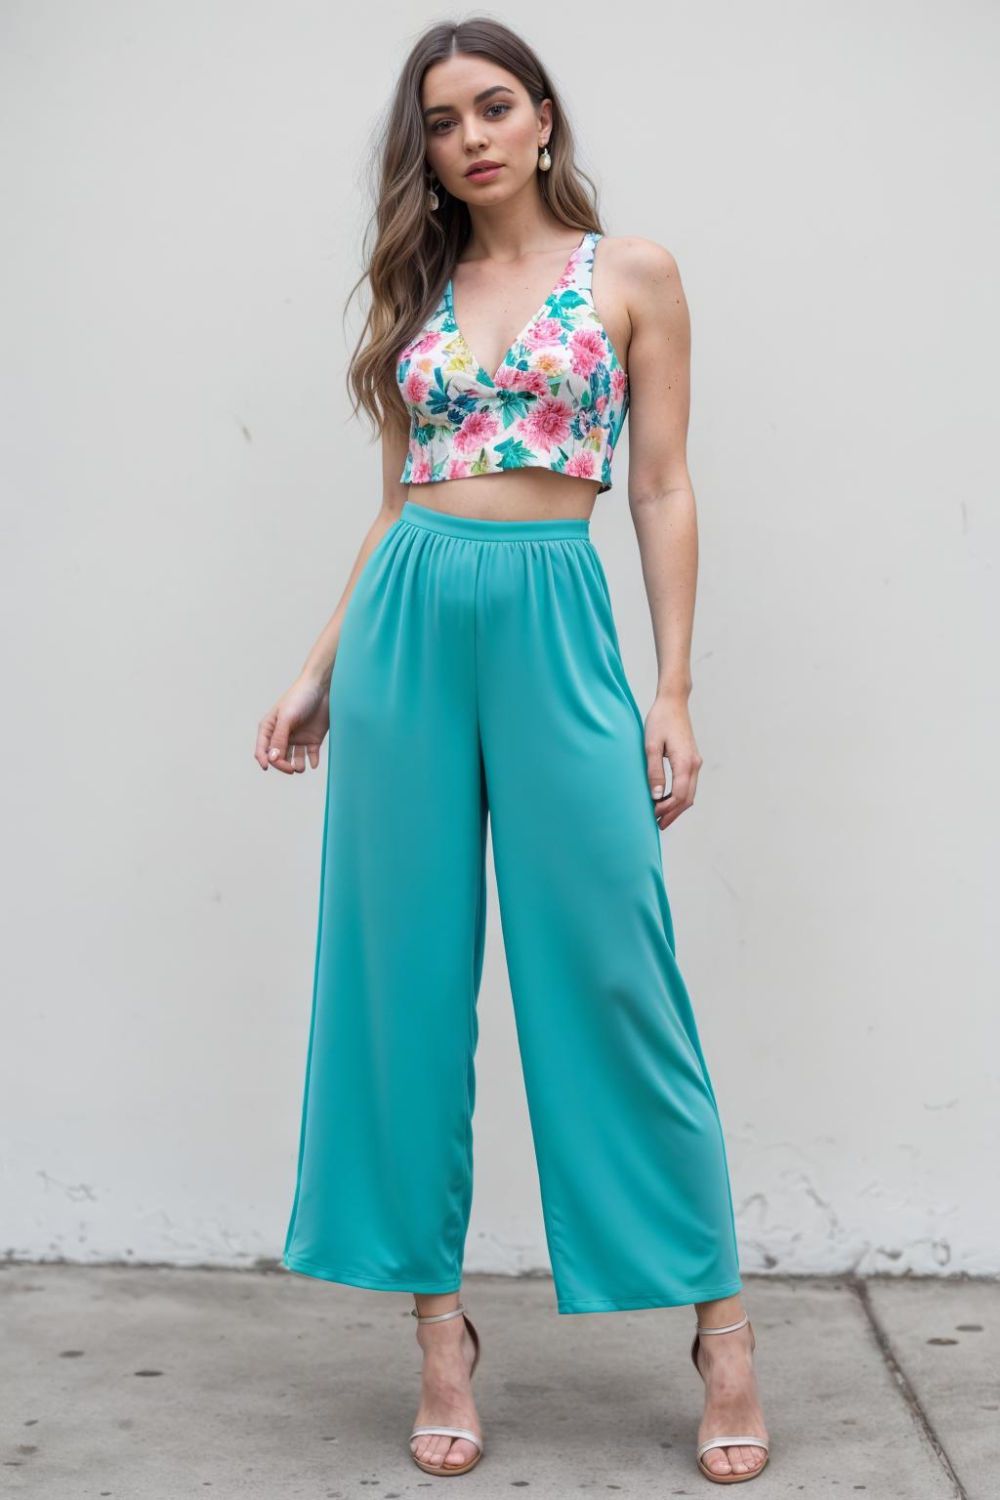 flowy palazzo pants outfit for birthday